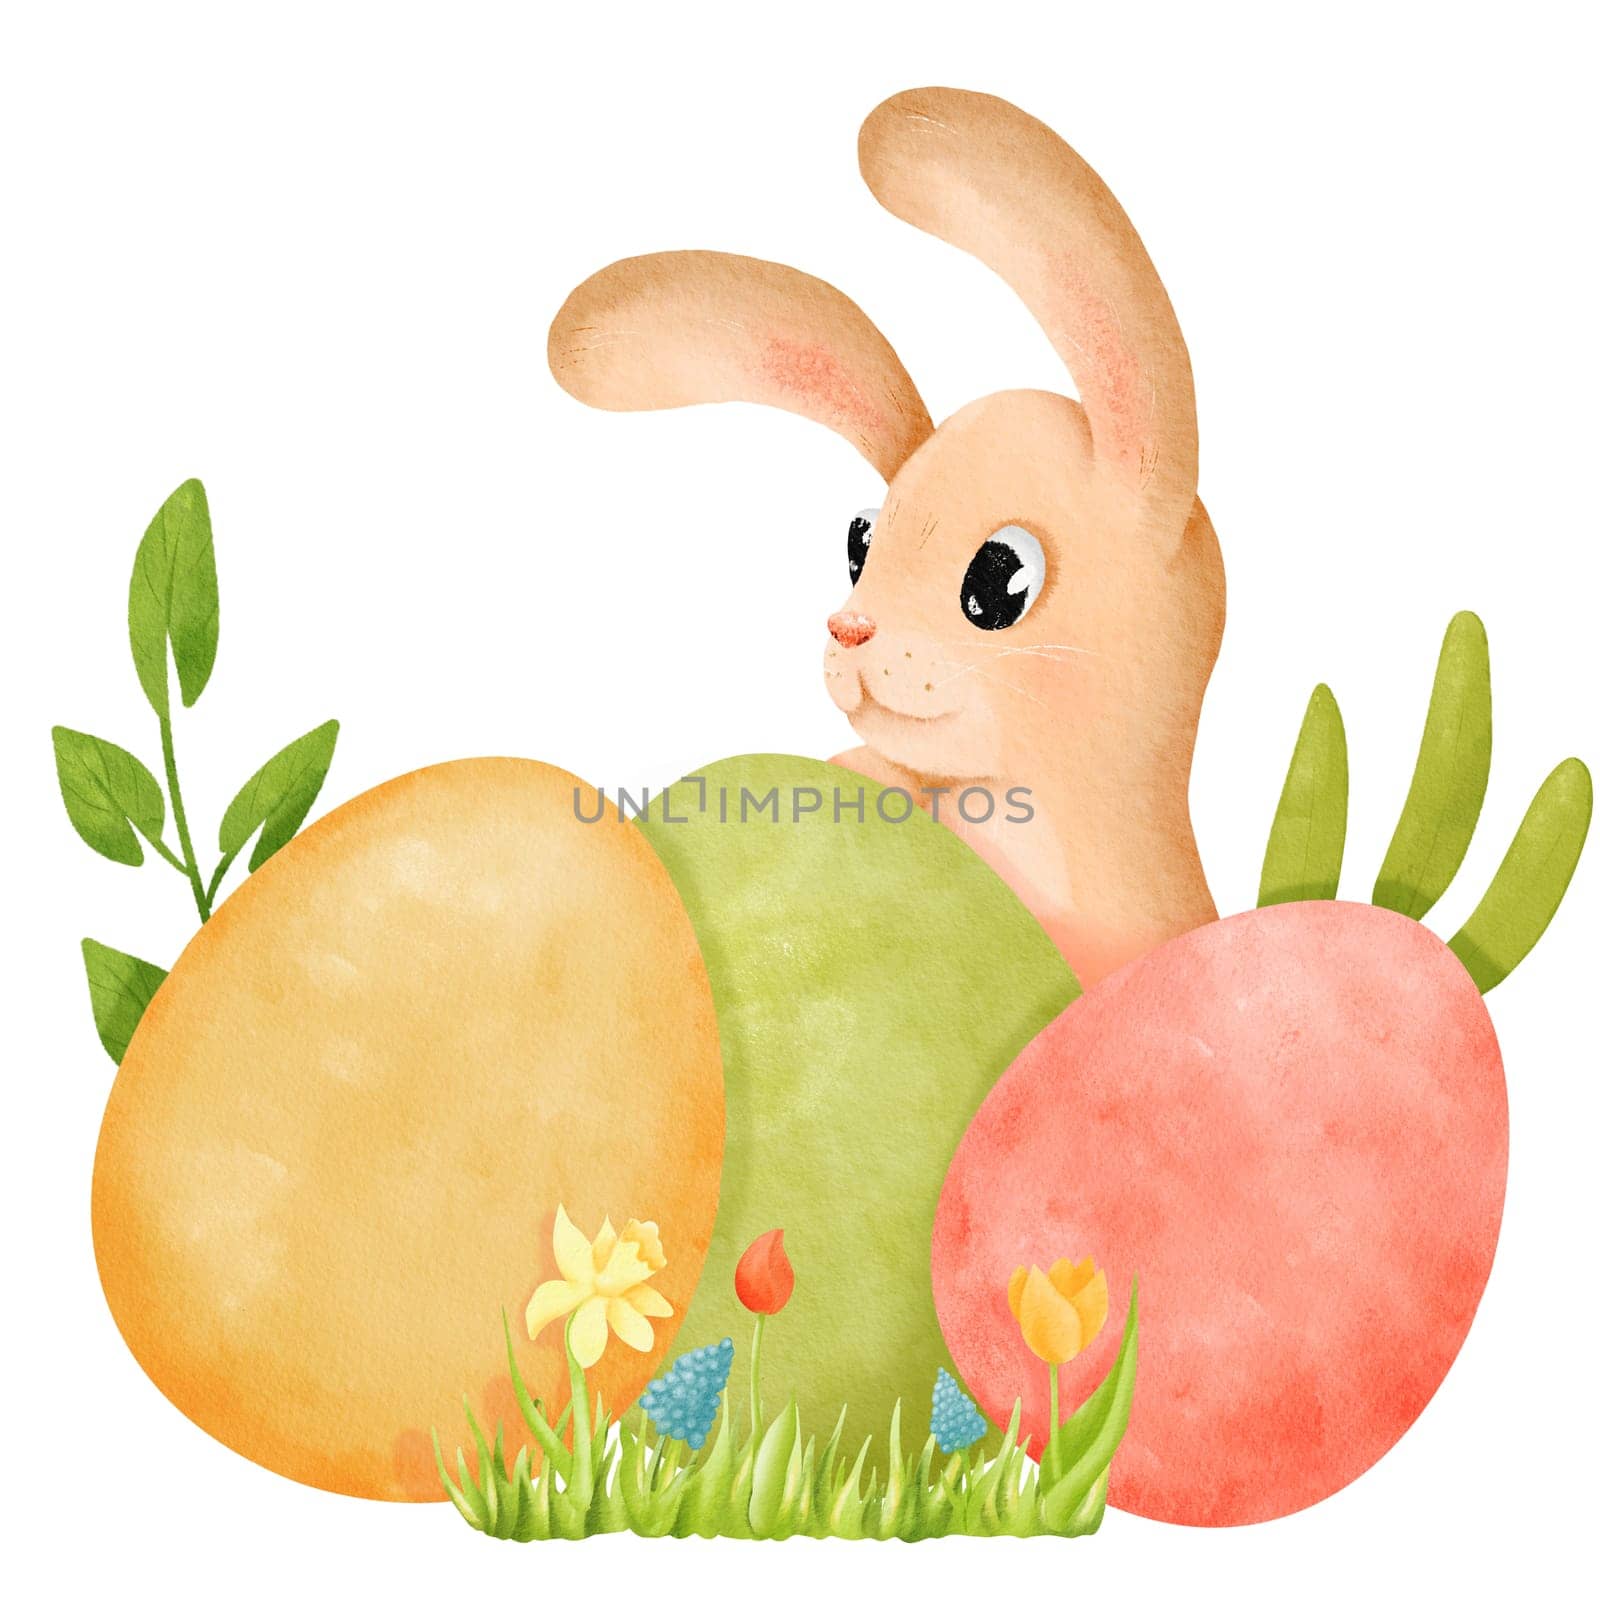 watercolor Easter composition. a charming bunny, vibrant dyed eggs, lush grass, and blossoming spring flowers. for creating festive Easter-themed designs, invitations, and joyful illustrations by Art_Mari_Ka